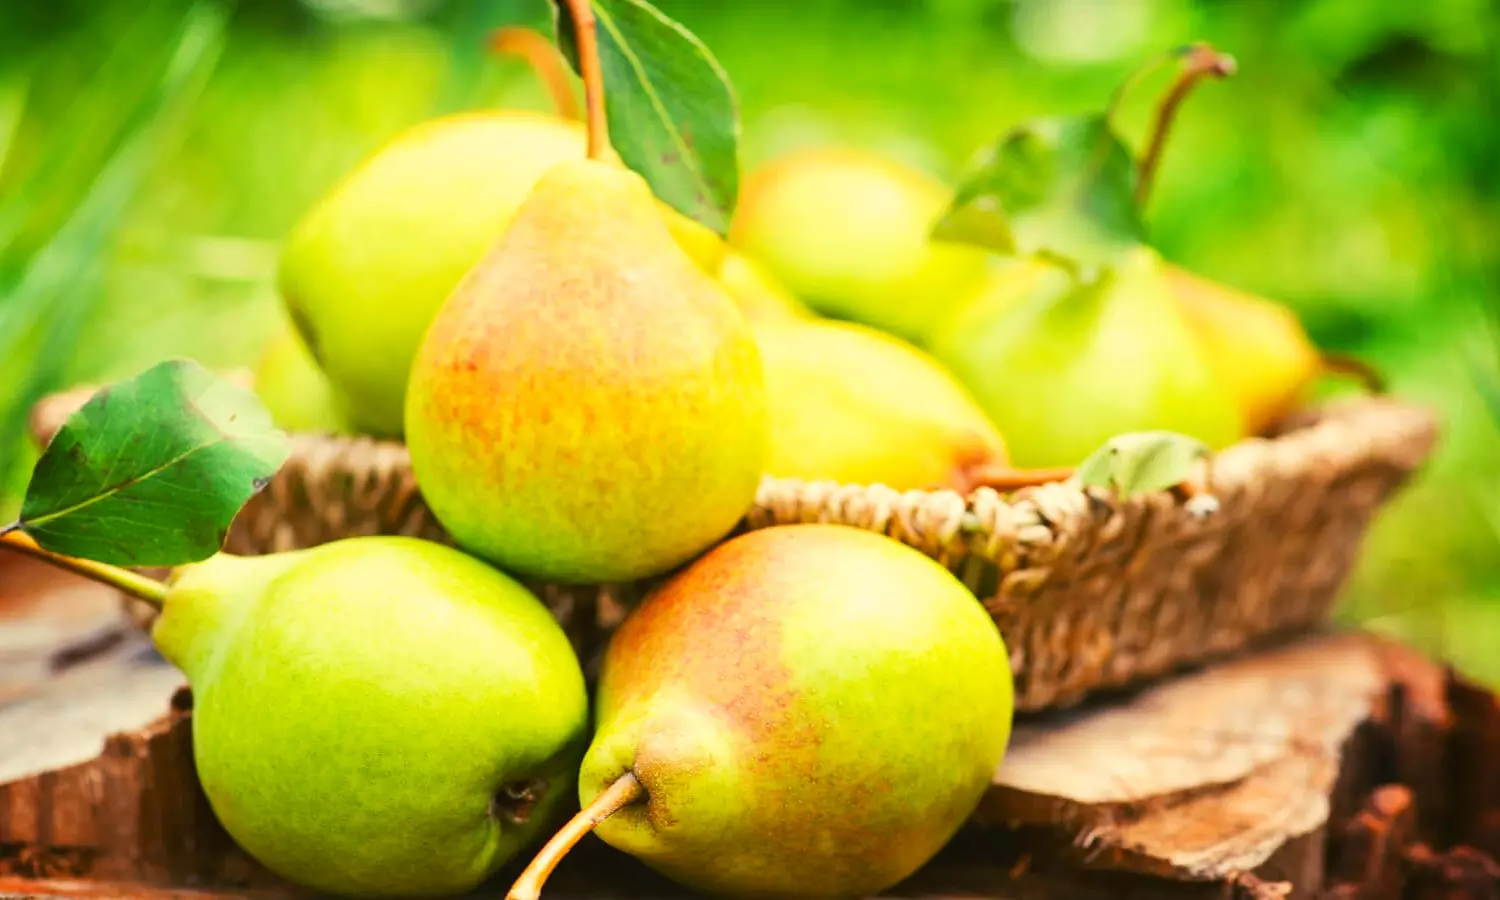 Benefits of Pear for Health